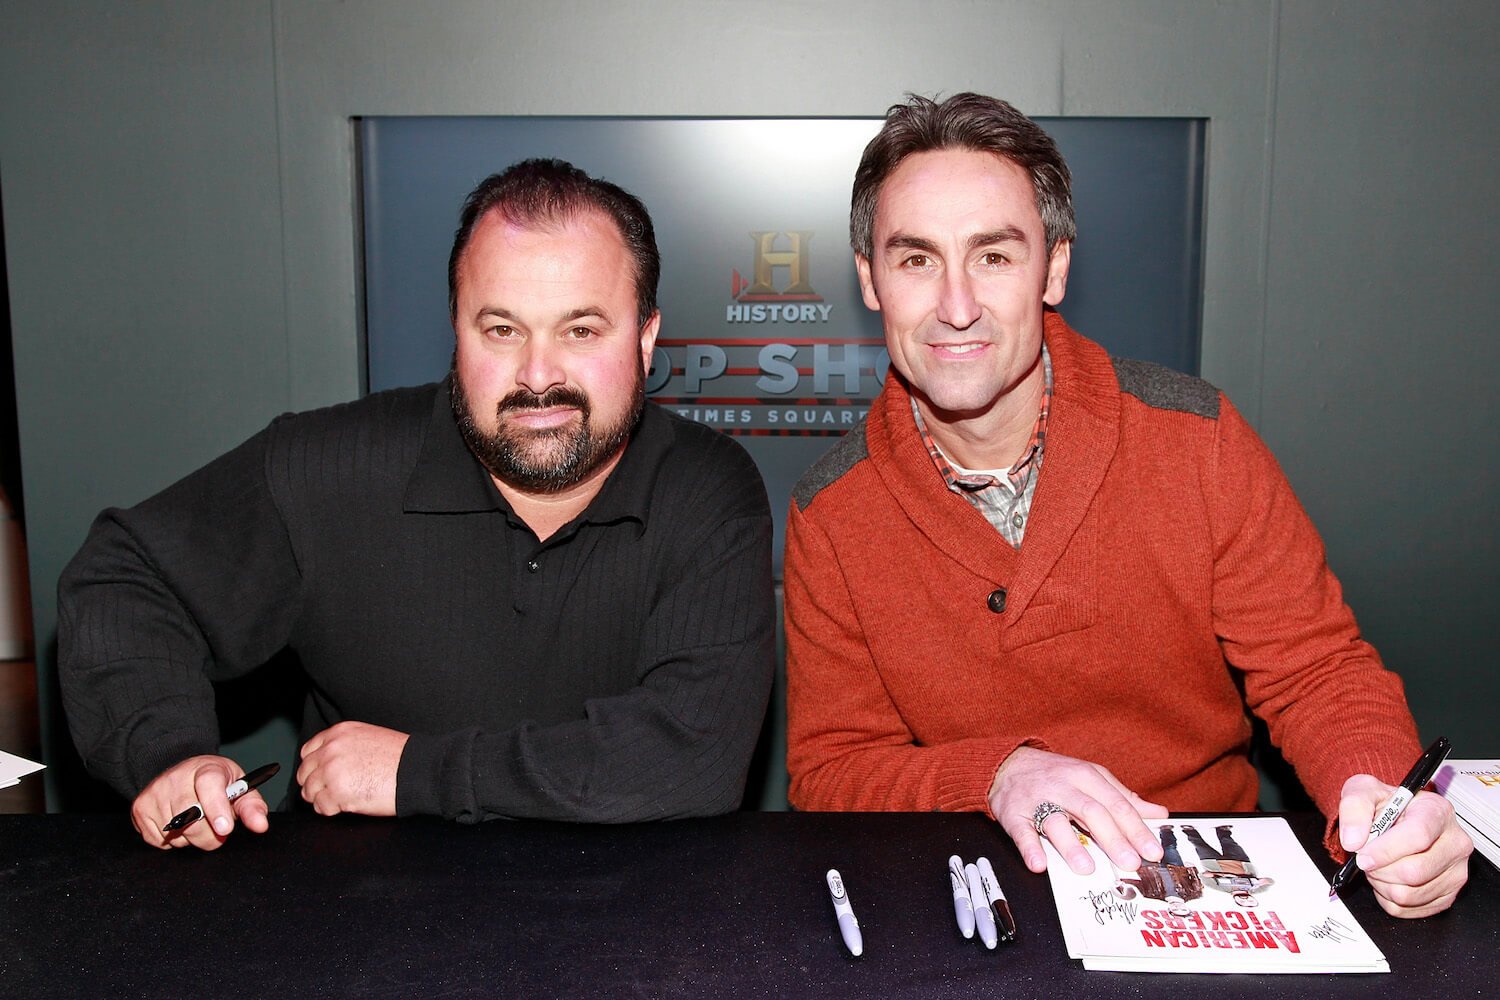 'American Pickers' stars Frank Fritz and Mike Wolfe sitting next to each other and smiling